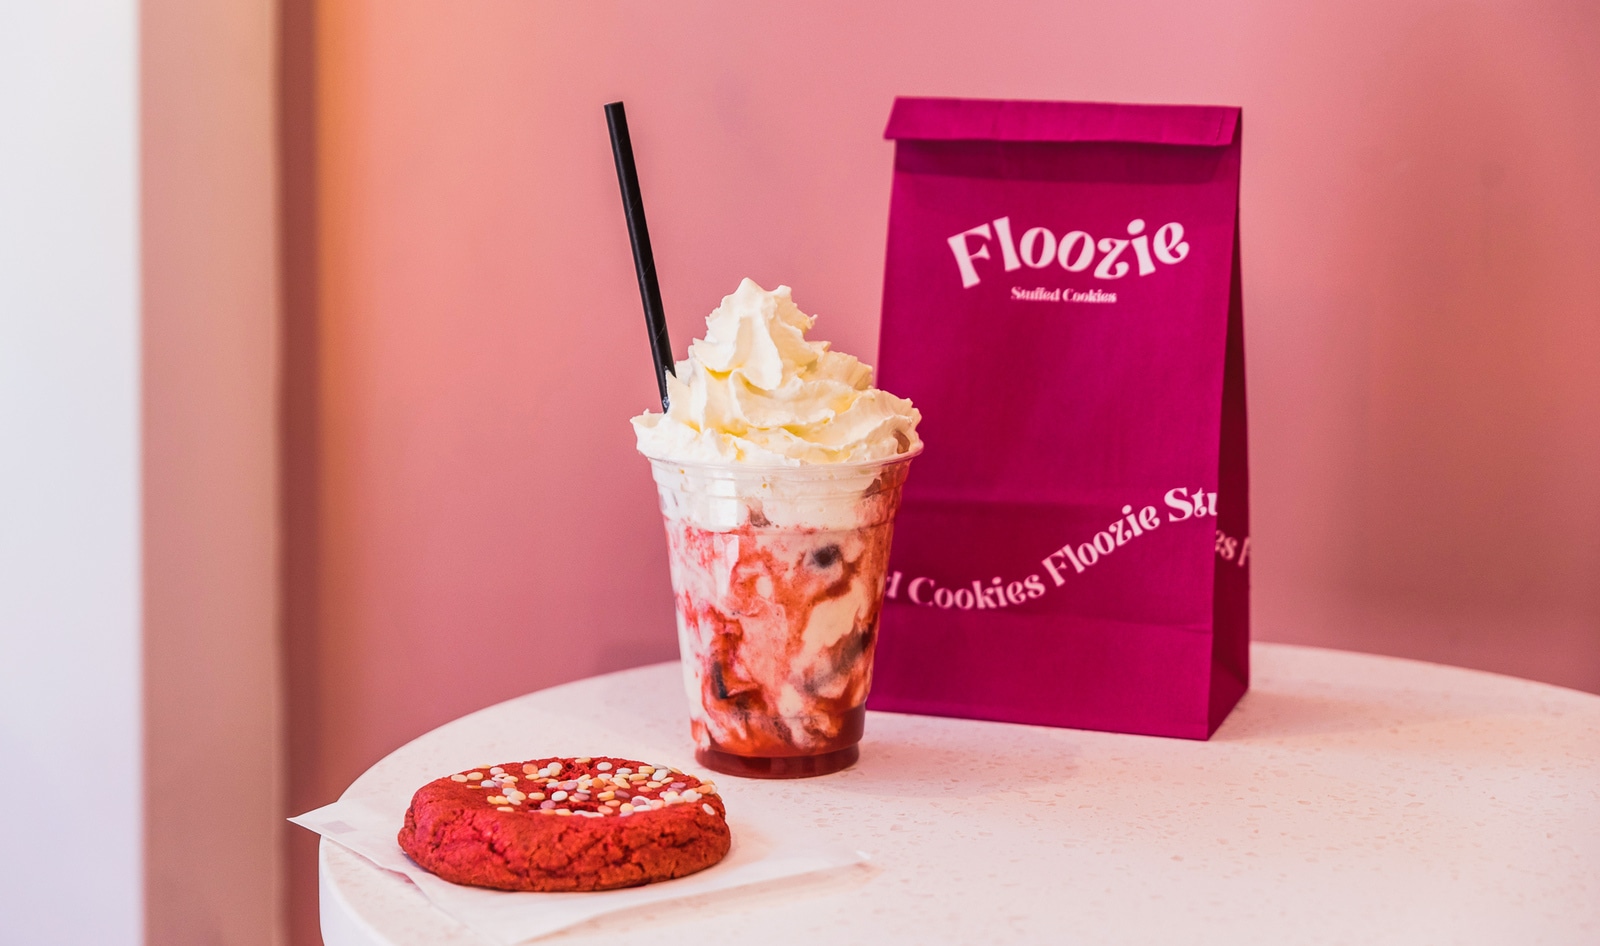 The Next Great American Franchise Is Going to Be a Vegan Dessert Shop